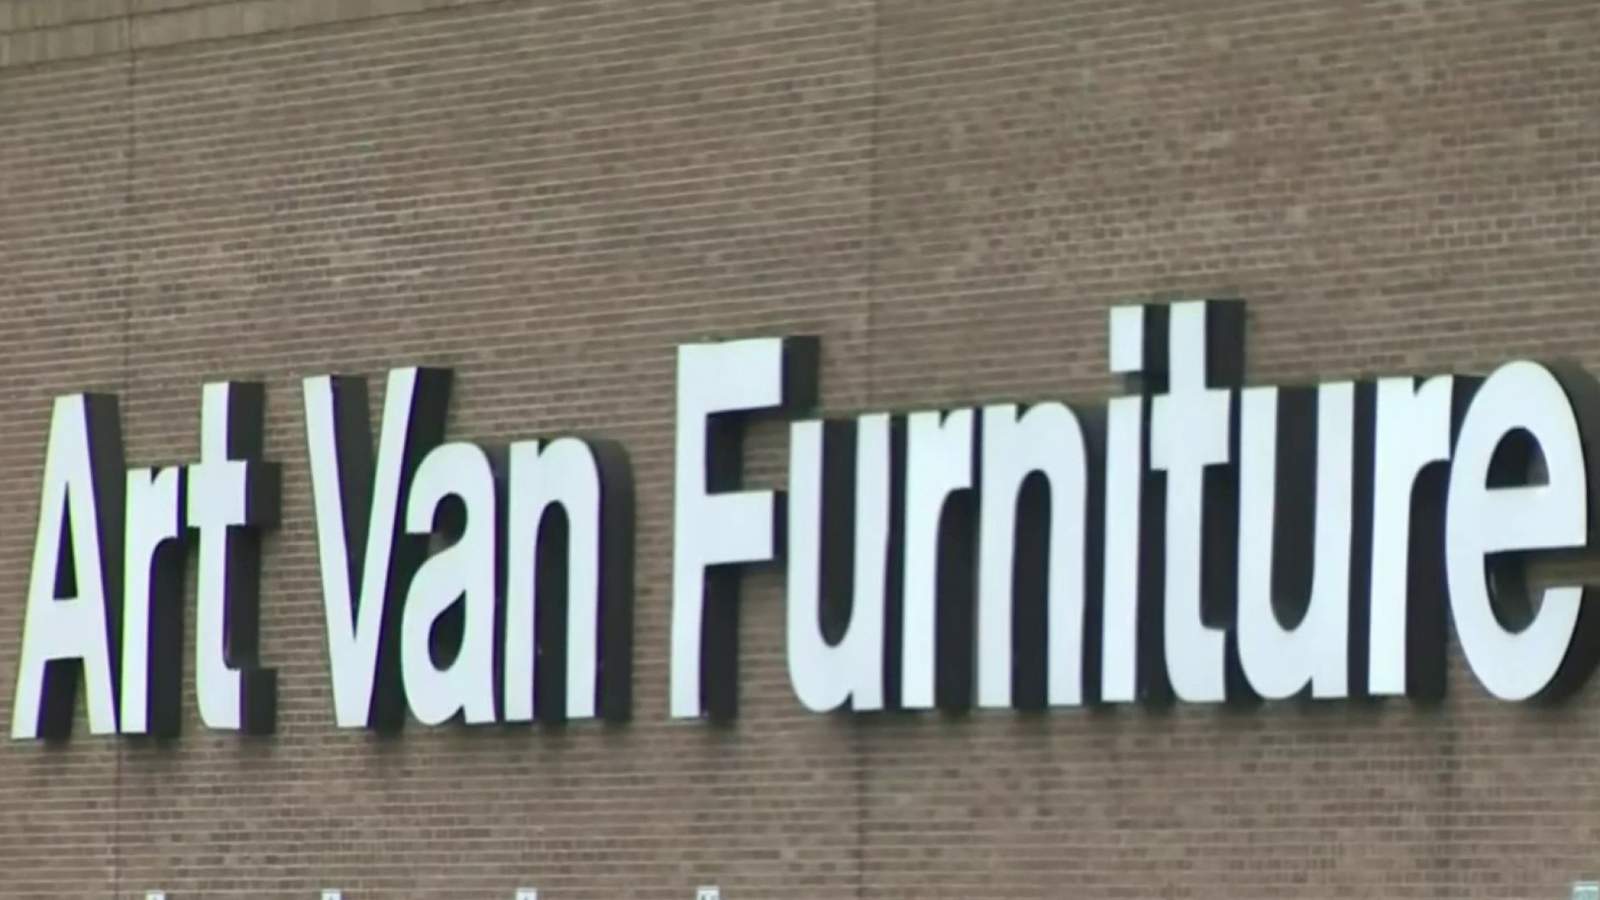 Art Van Furniture to close all stores: How did we get here?